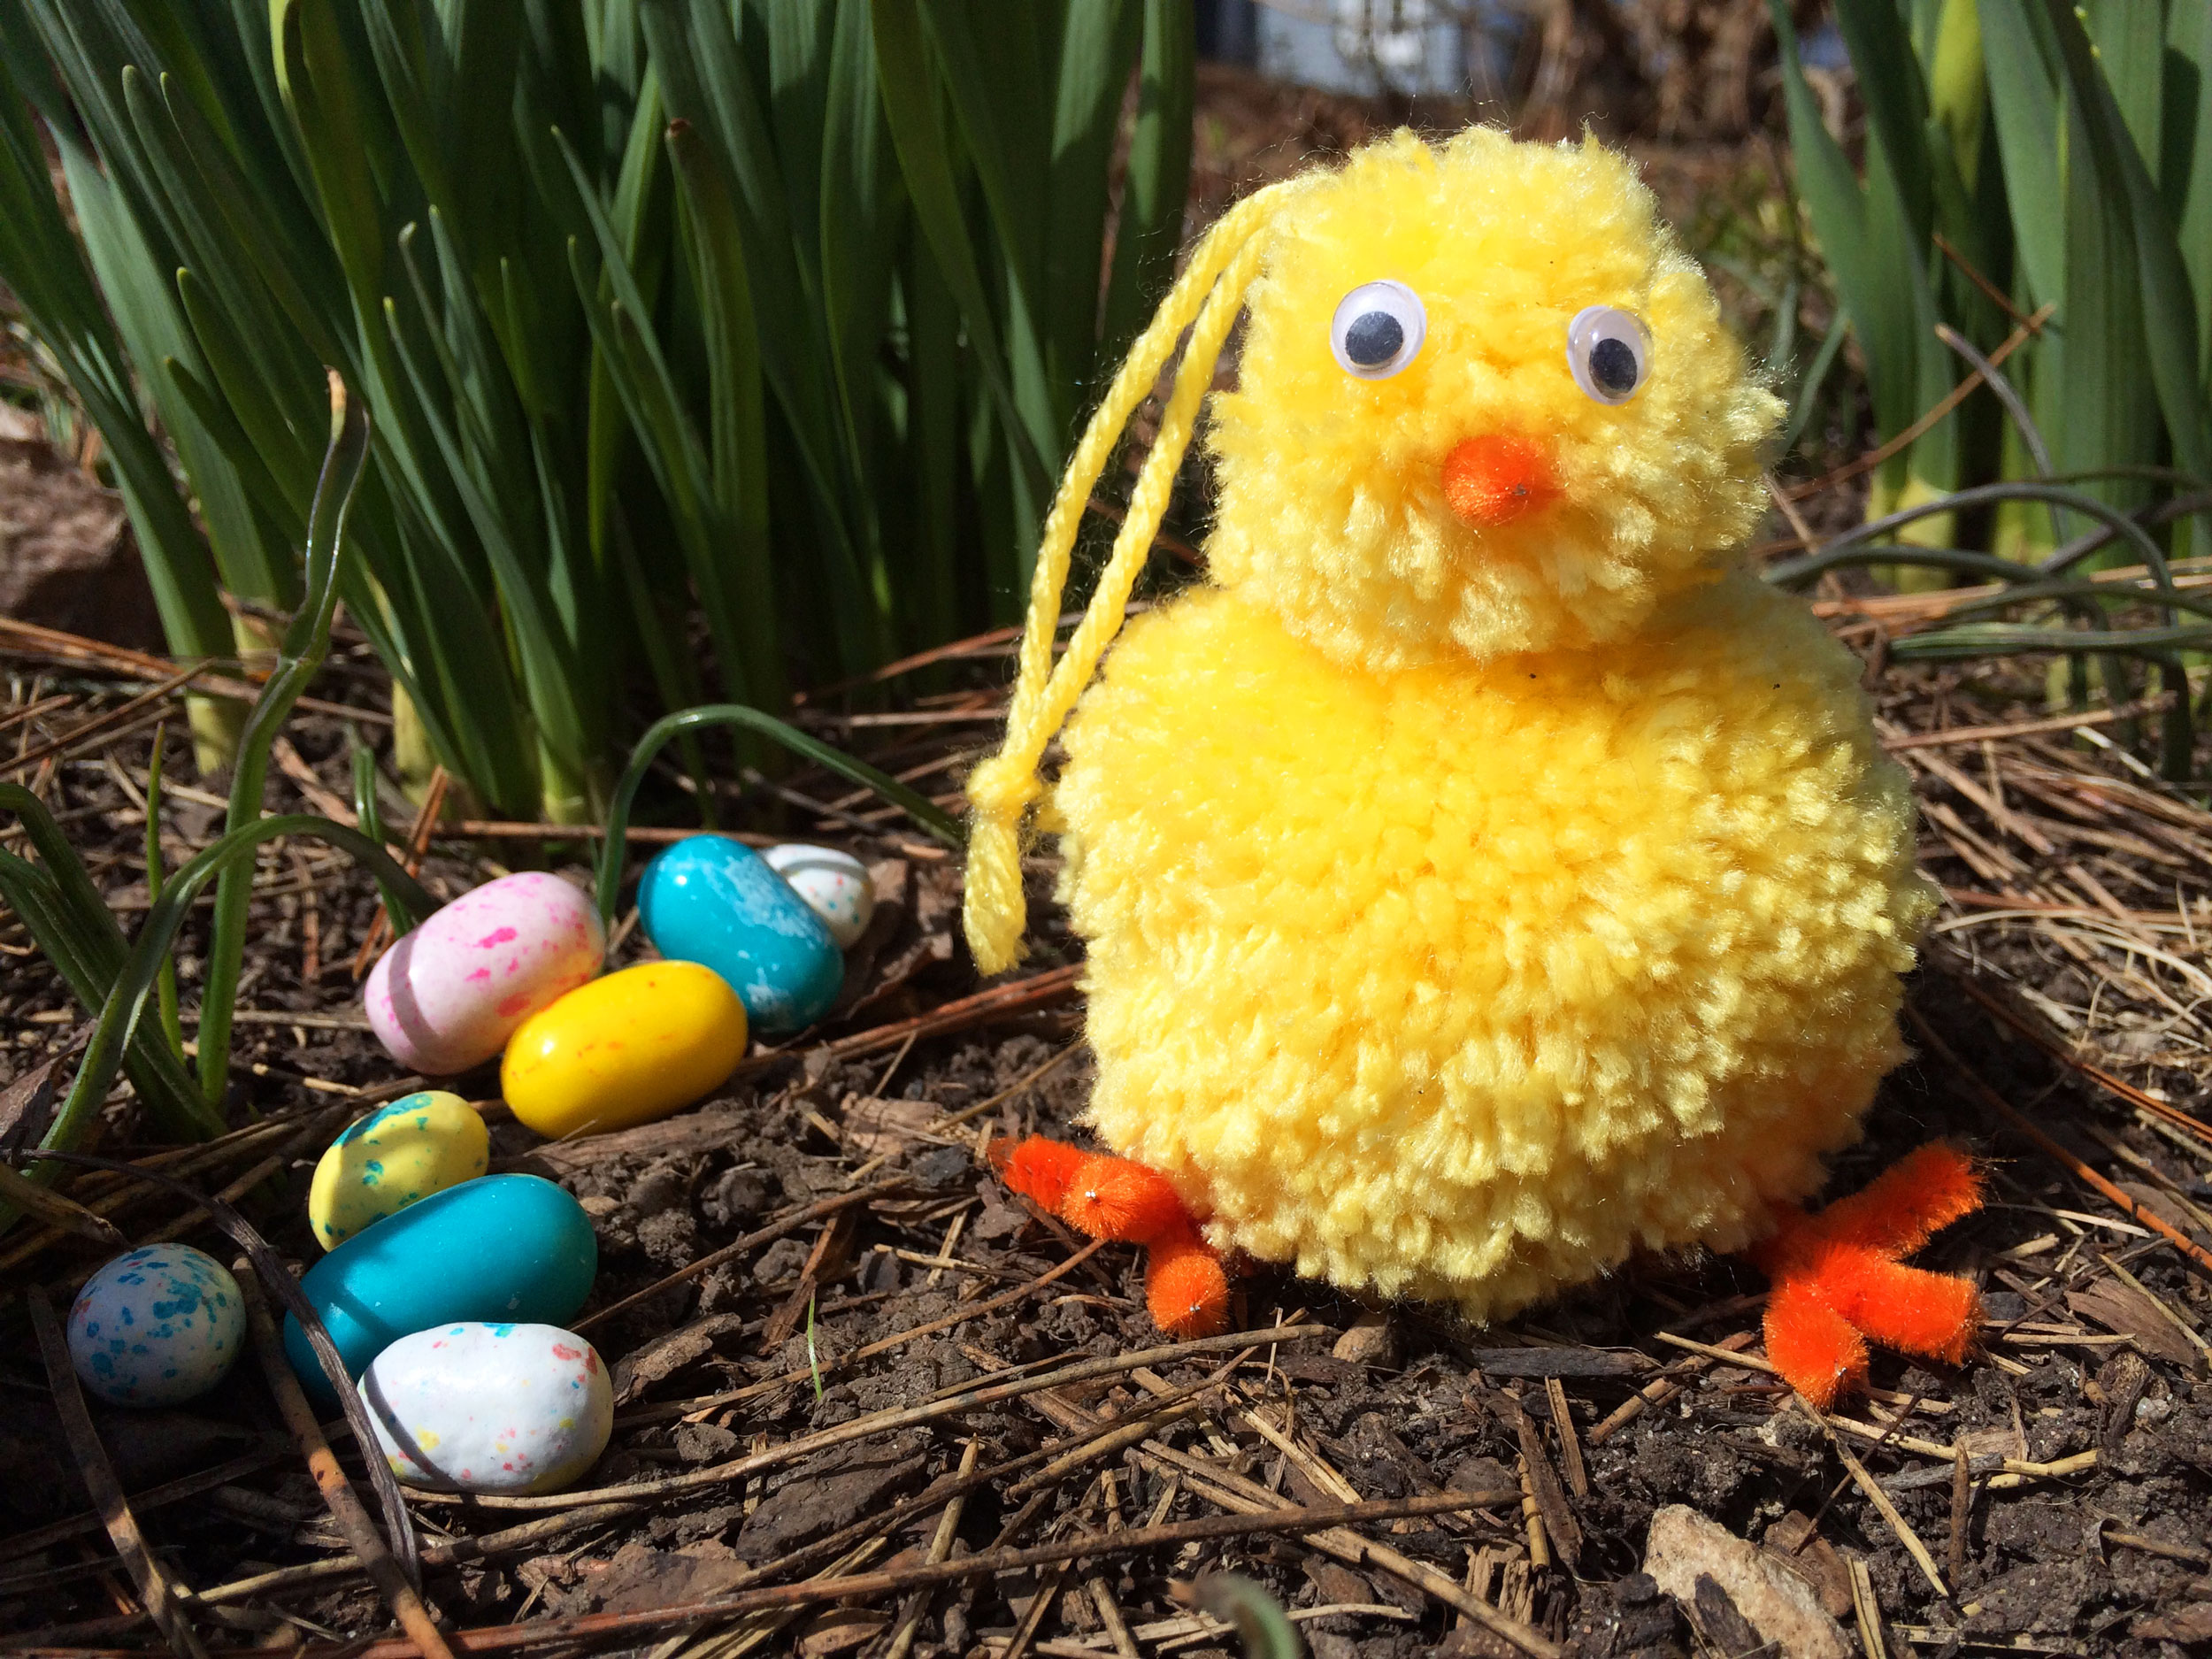 Finished DIY Easter Chick Ornament in the Grass | OrnamentShop.com